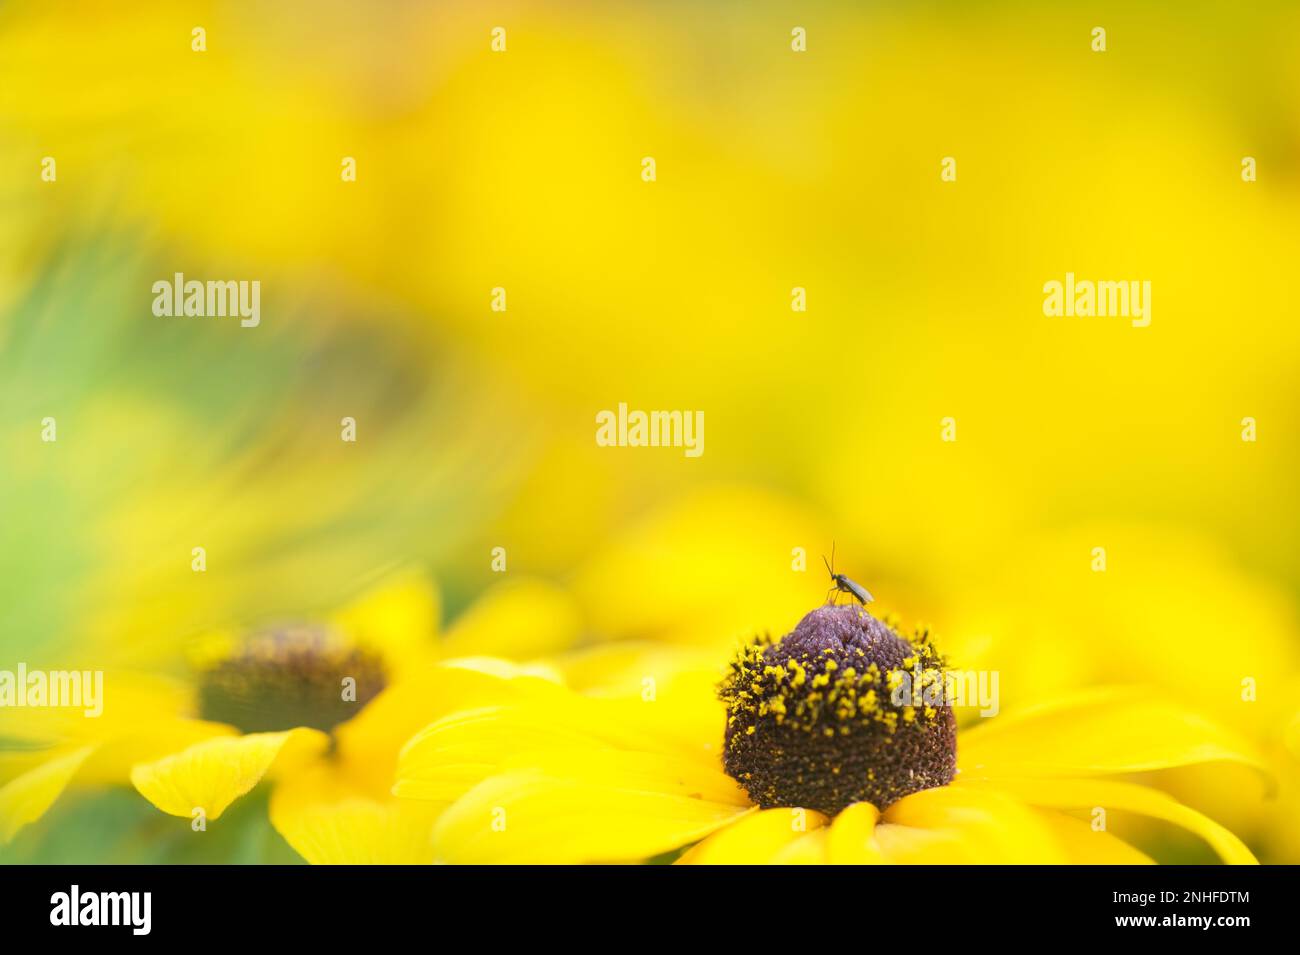 Small midge on a Black-eyed susan flower (Rudbeckia hirta). Selective focus and shallow depth of field. Stock Photo